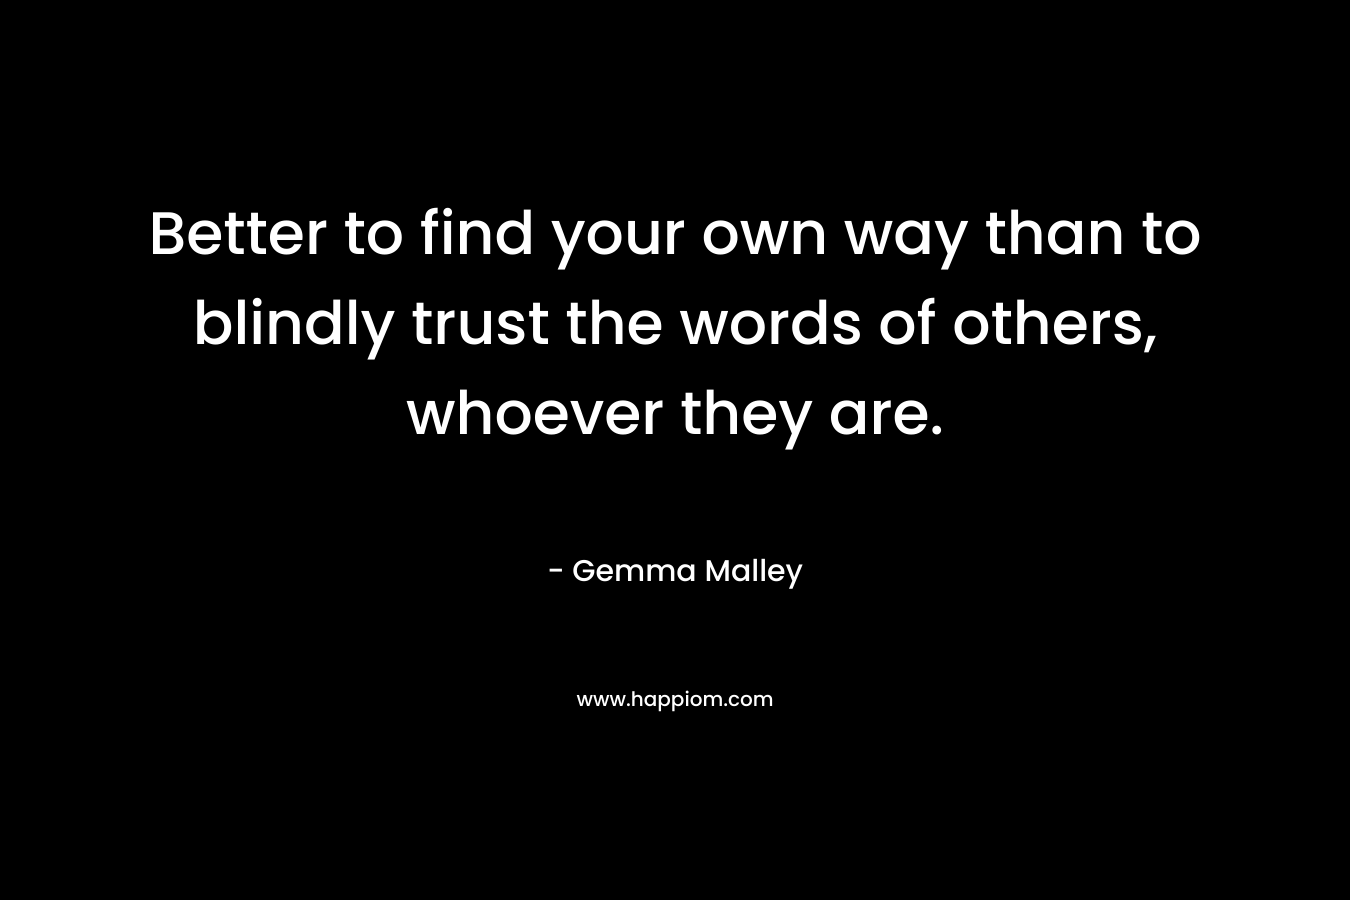 Better to find your own way than to blindly trust the words of others, whoever they are.